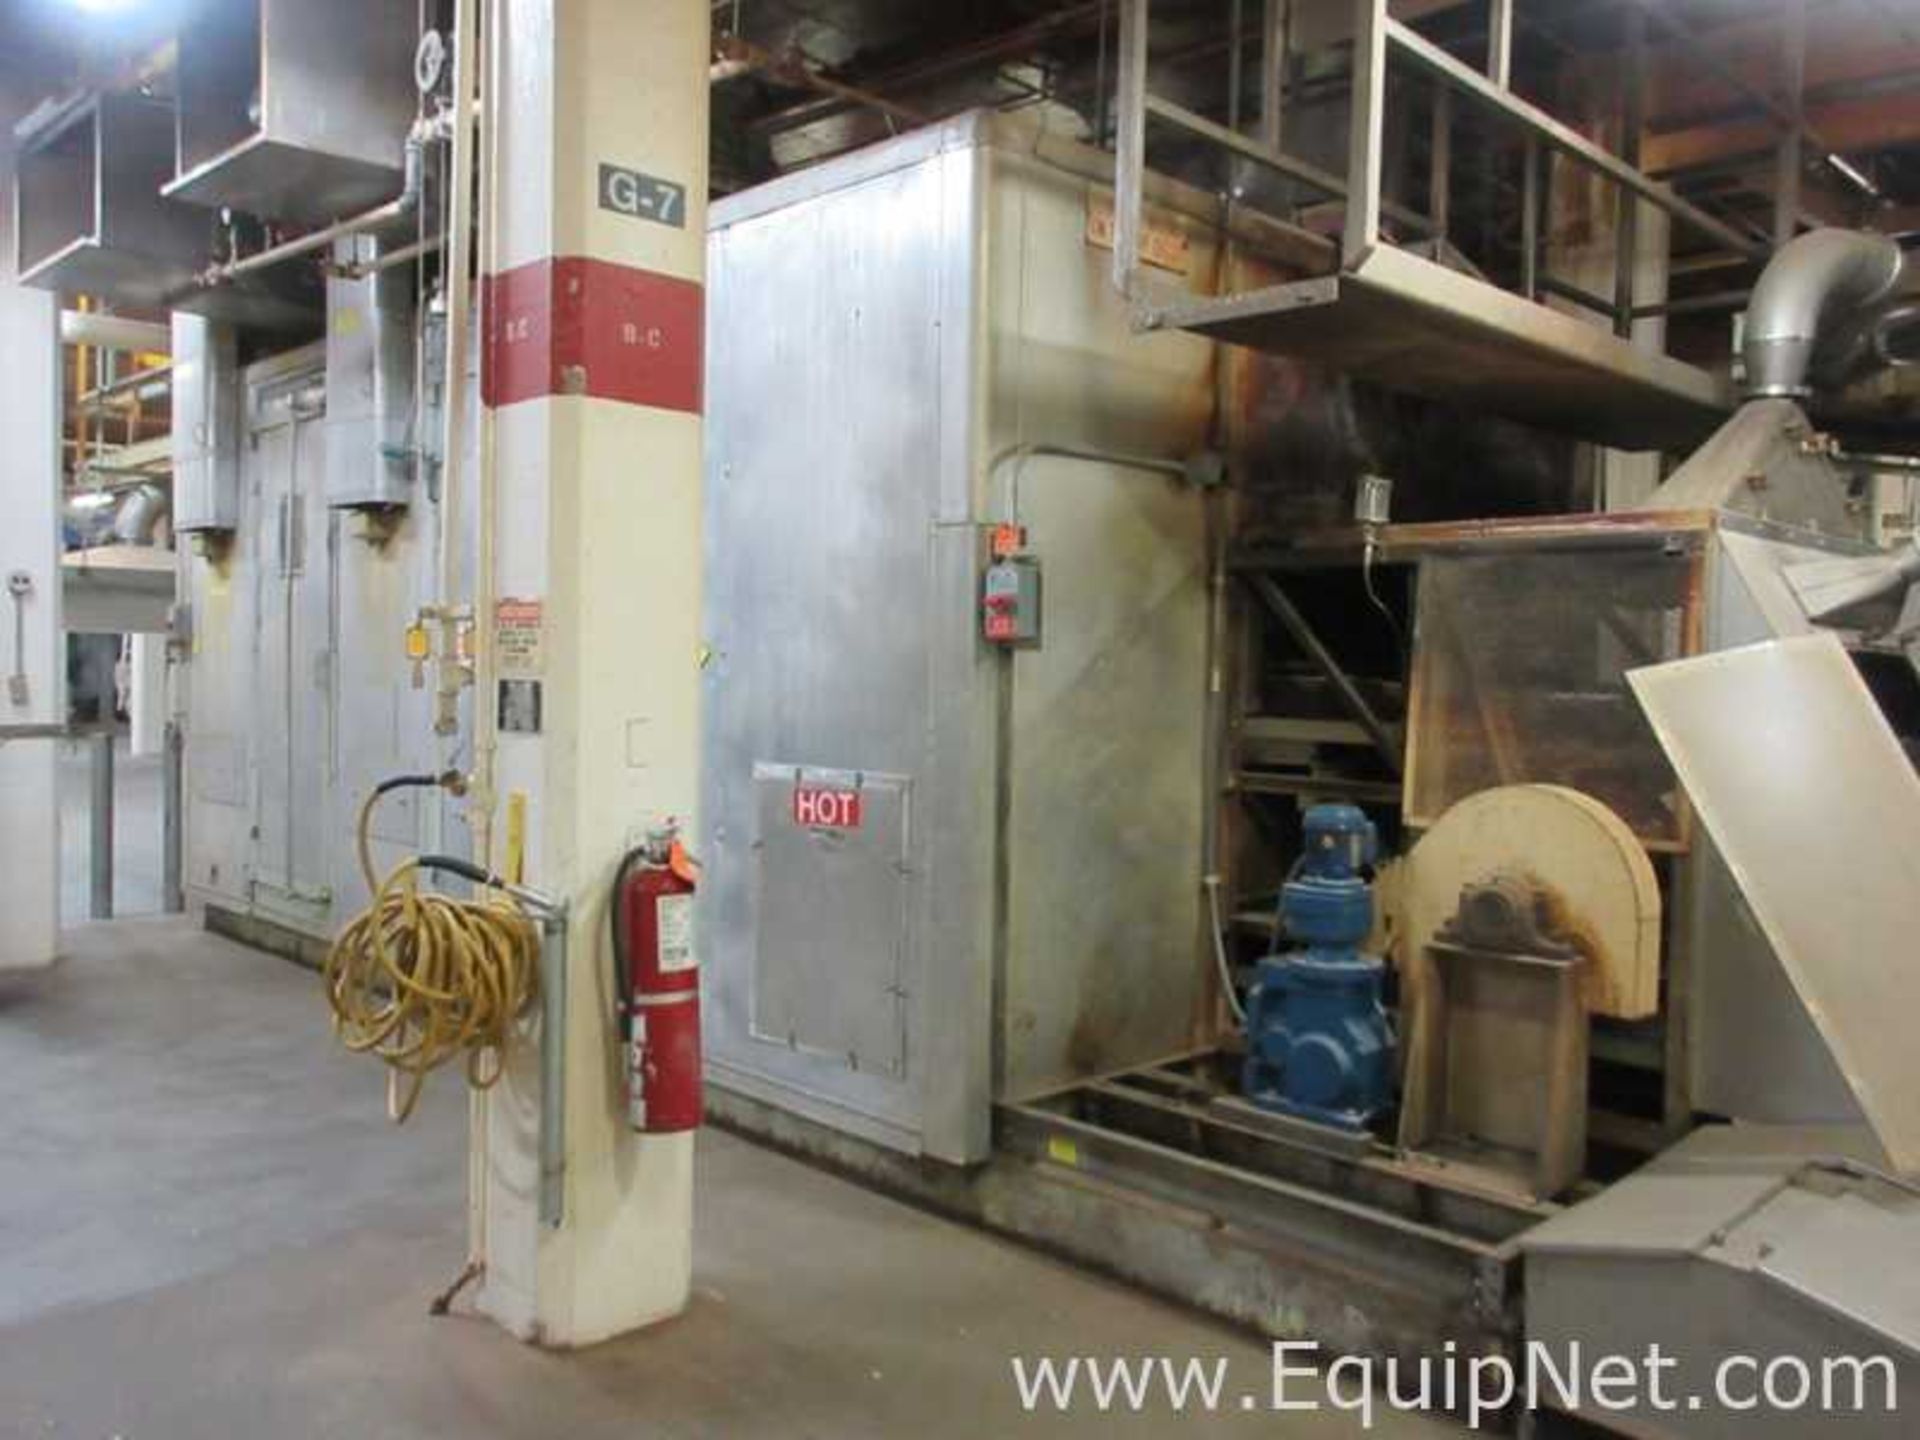 EQUIPNET LISTING #597061; REMOVAL COST: $0; DESCRIPTION: National Drying Machinery Belt - Image 25 of 27